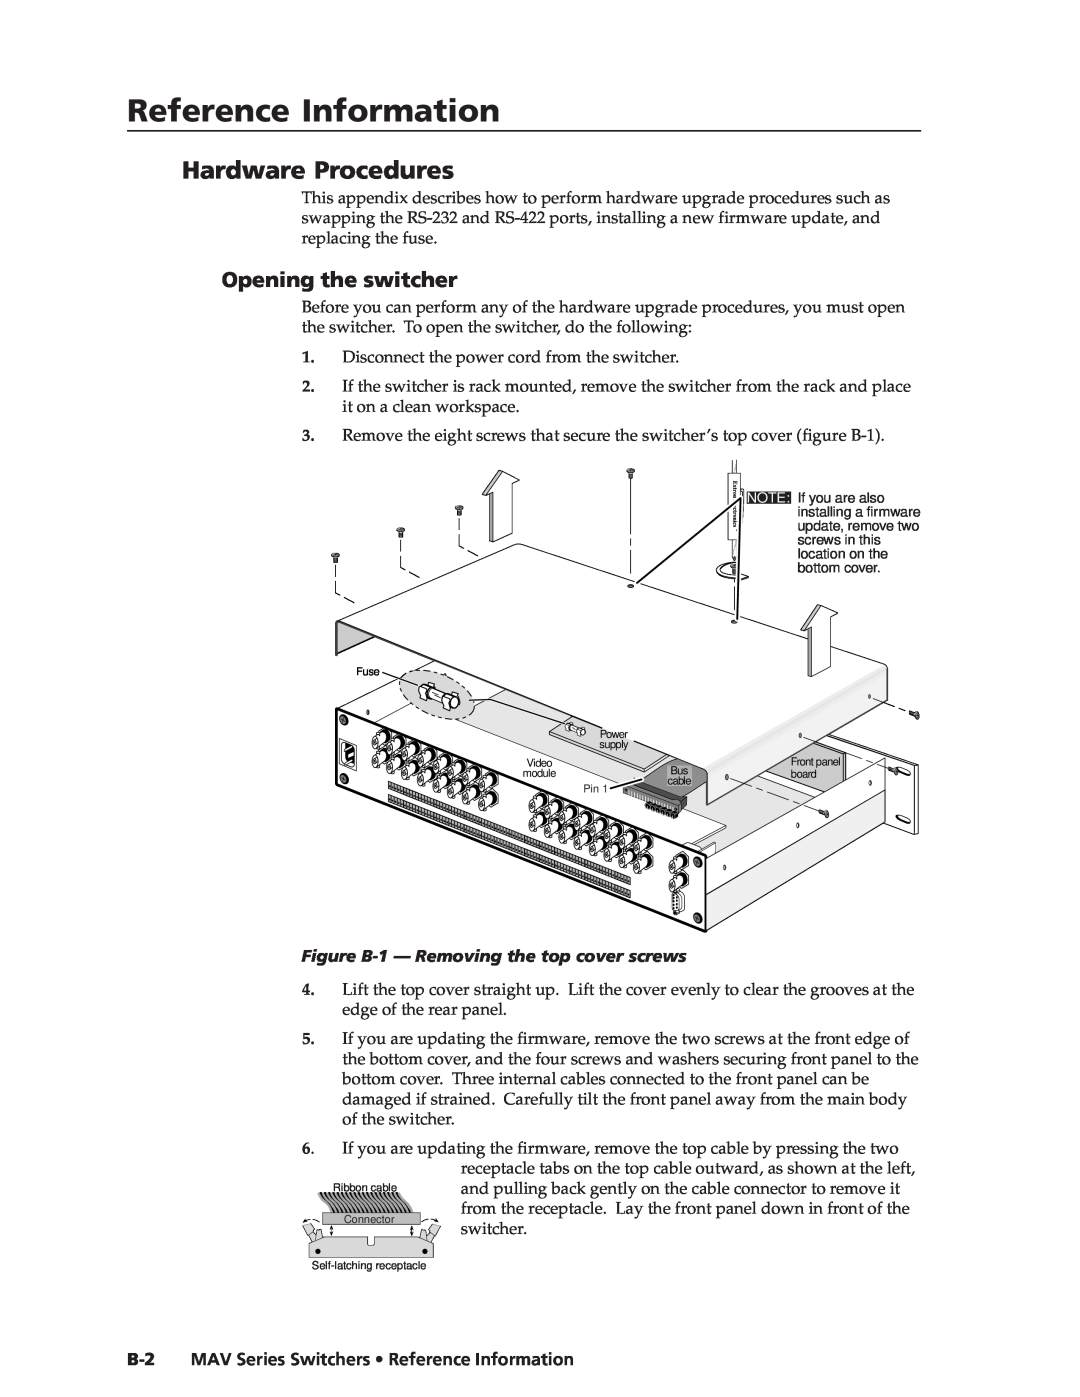 Extron electronic MAV manual ReferenceInformation,co t’d, Hardware Procedures, Opening the switcher 